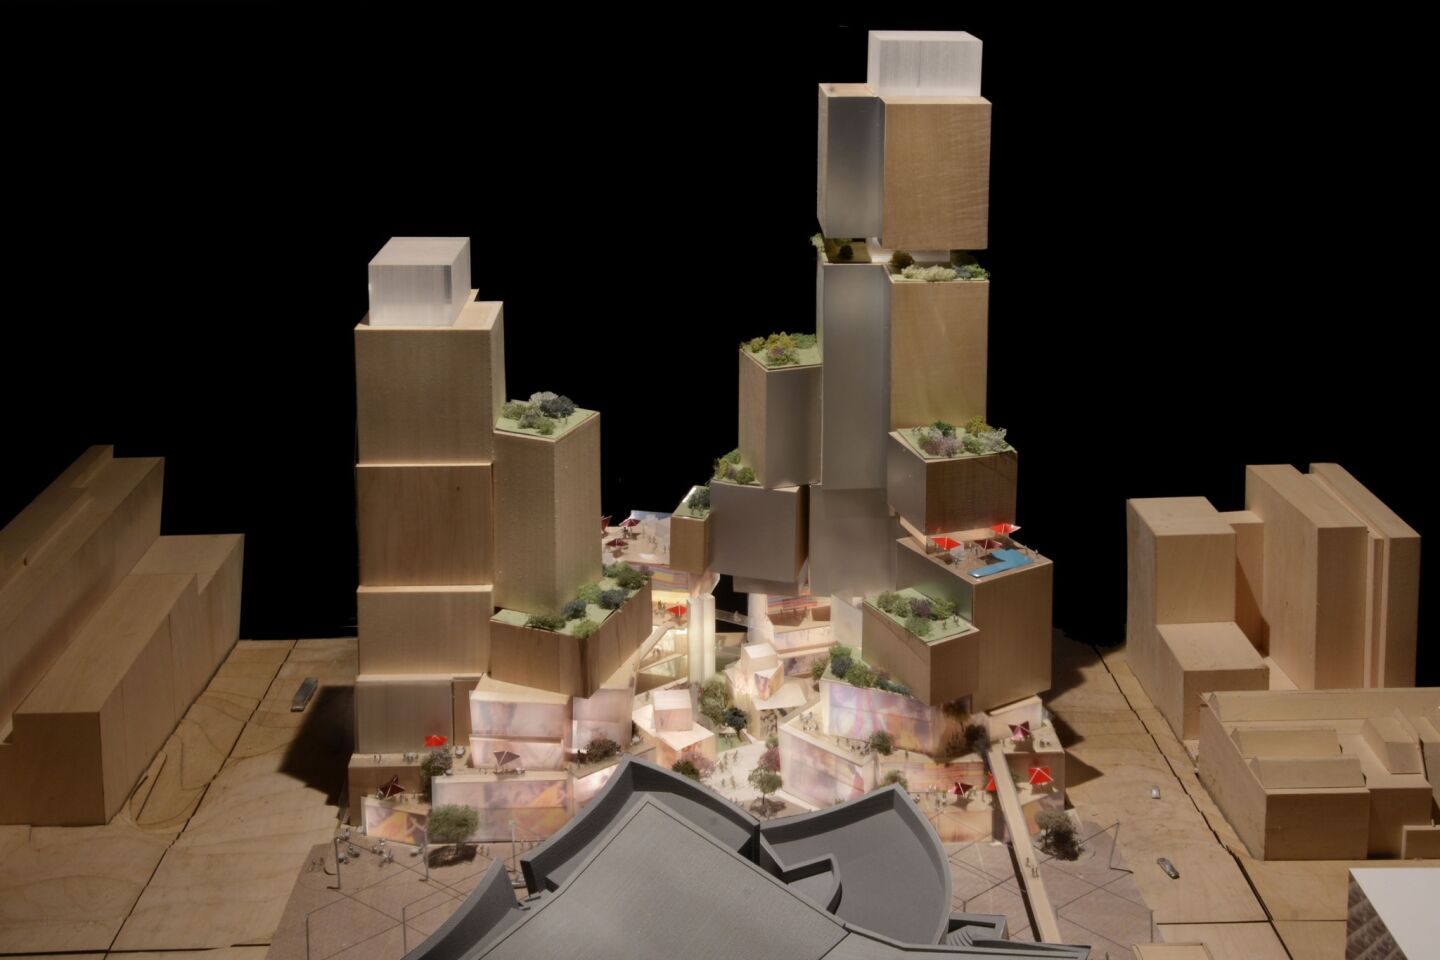 A proposal by architect Frank Gehry's firm calls for a stacked collection of shops and restaurants and includes two towers, one holding an SLS Hotel and the other filled with condominiums and apartments.